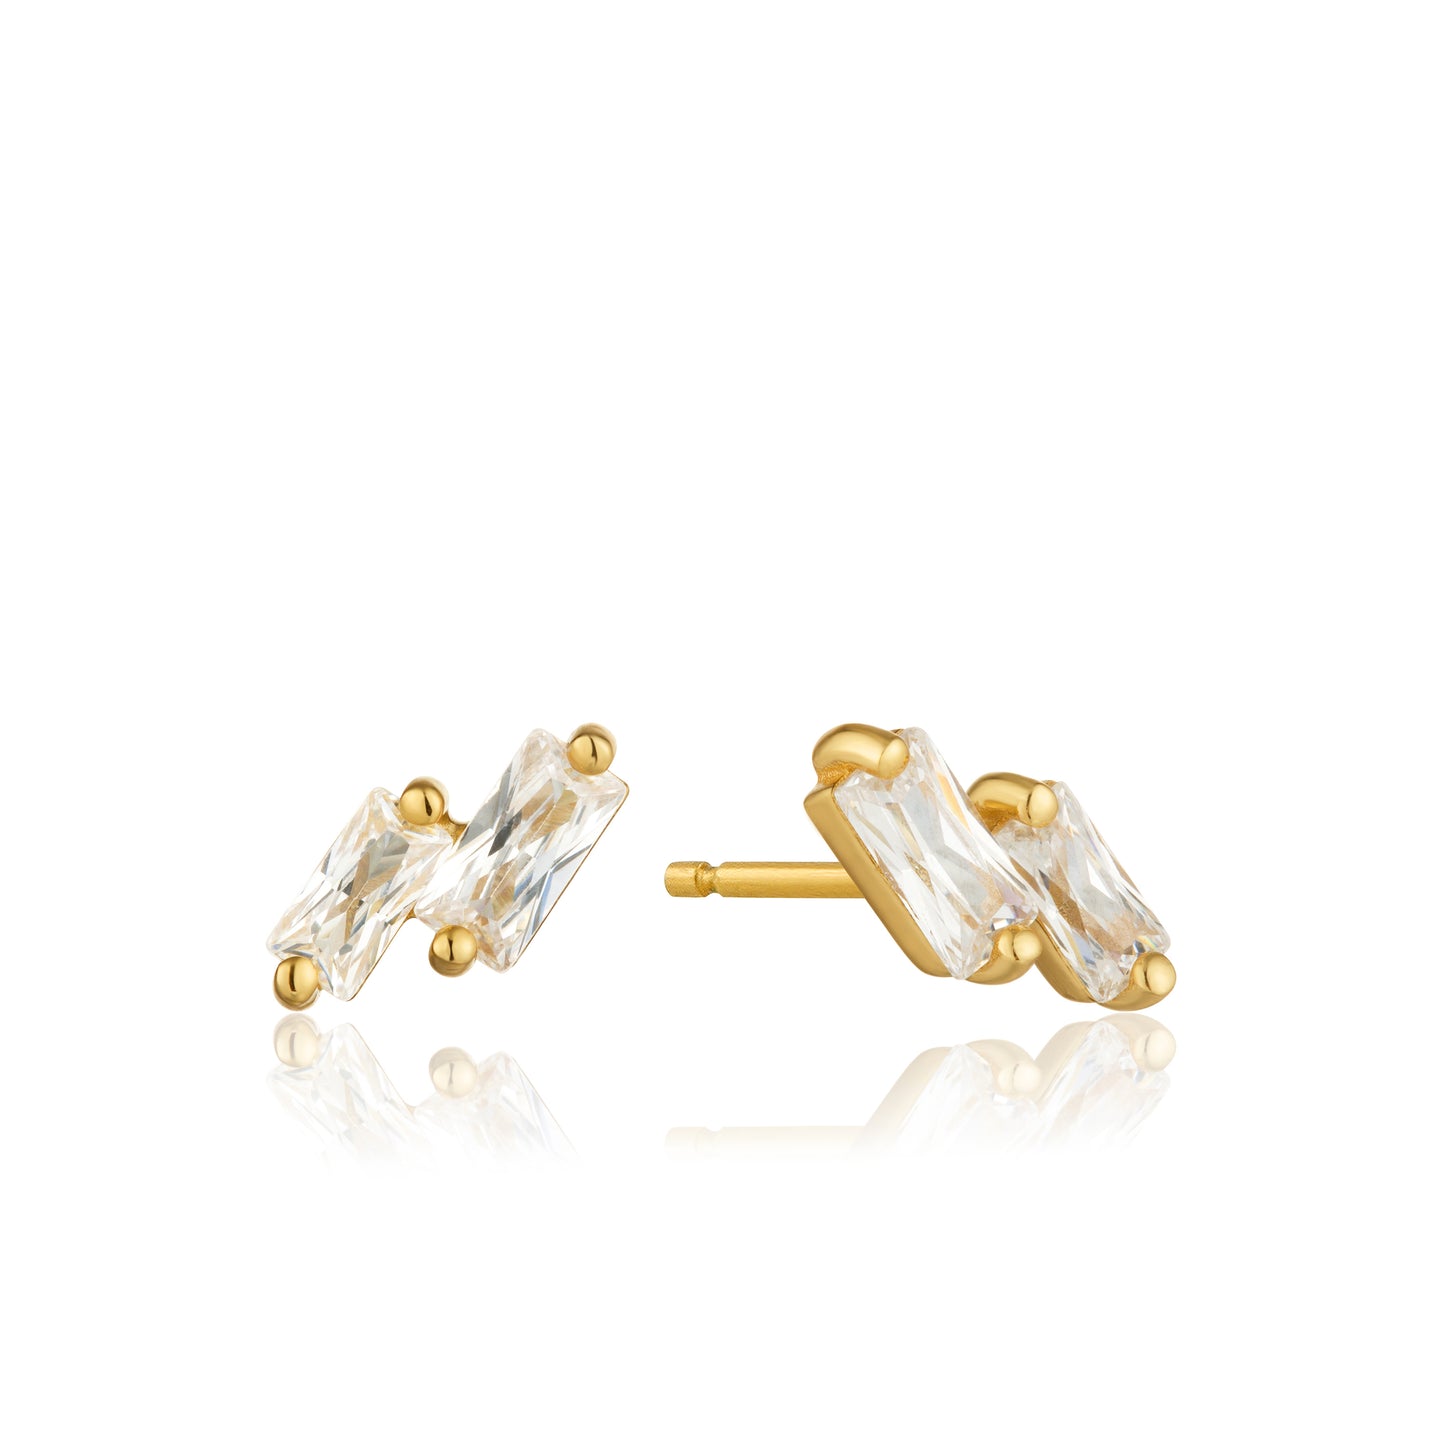 ANIA HAIE ANIA HAIE - Gold Glow Stud Earrings available at The Good Life Boutique